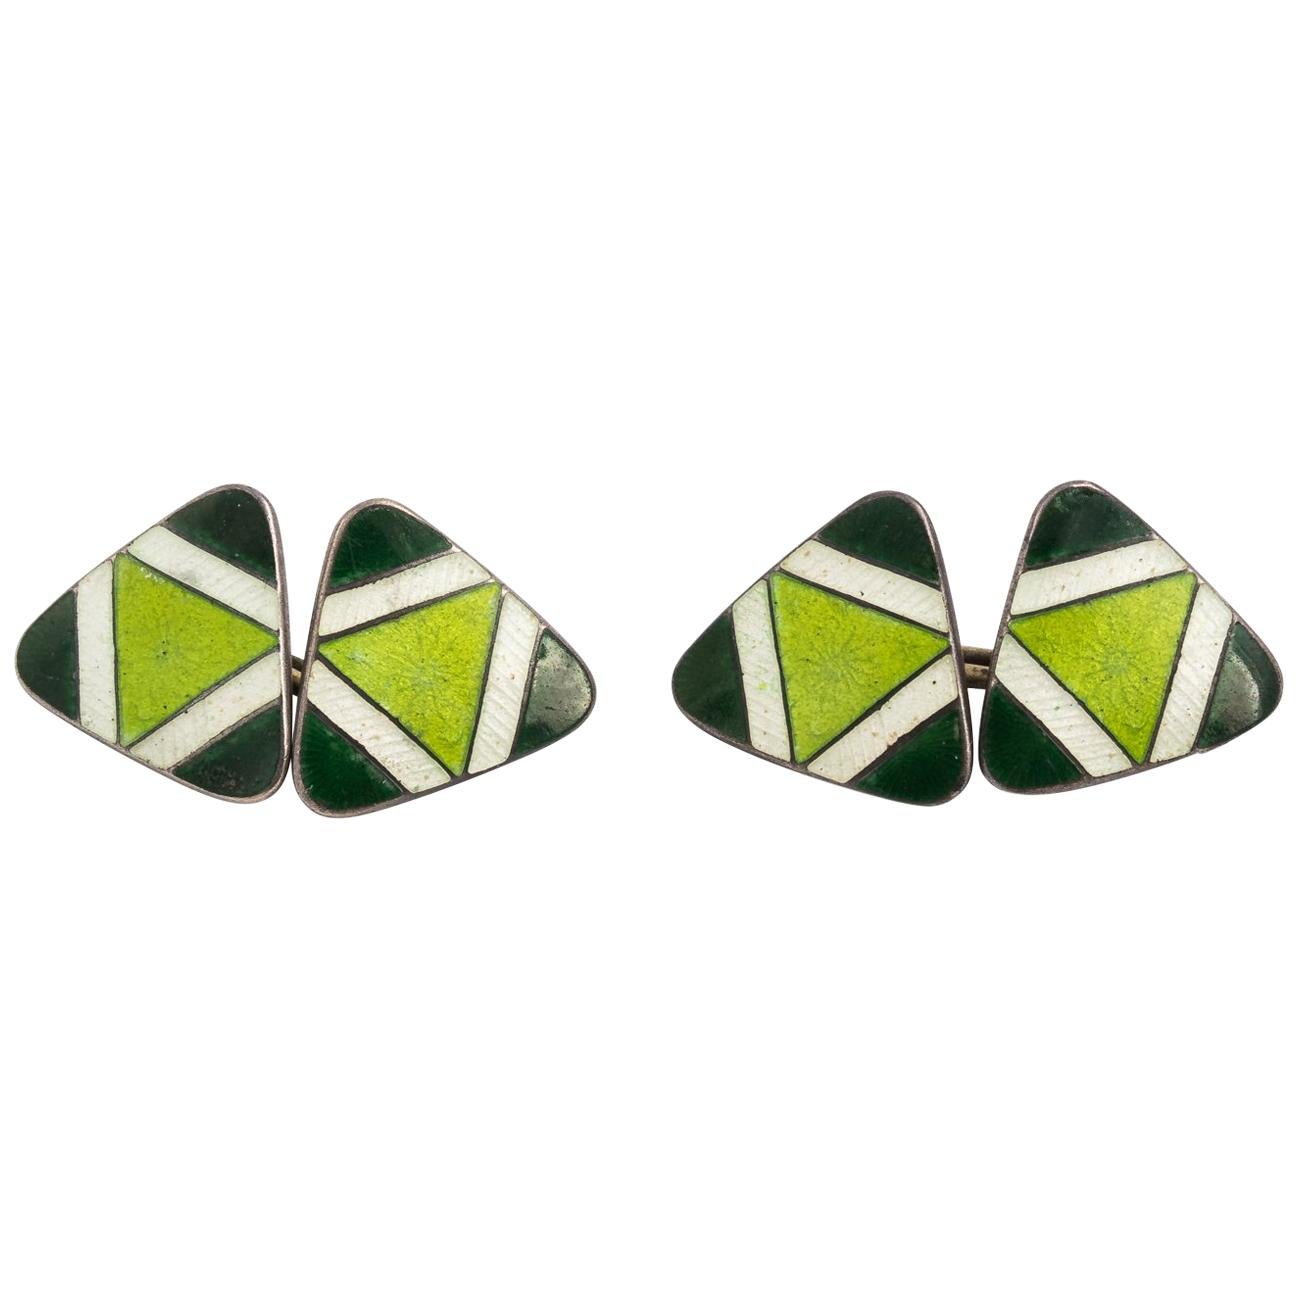 Pair of Green Sterling Silver and Enamel Cufflinks